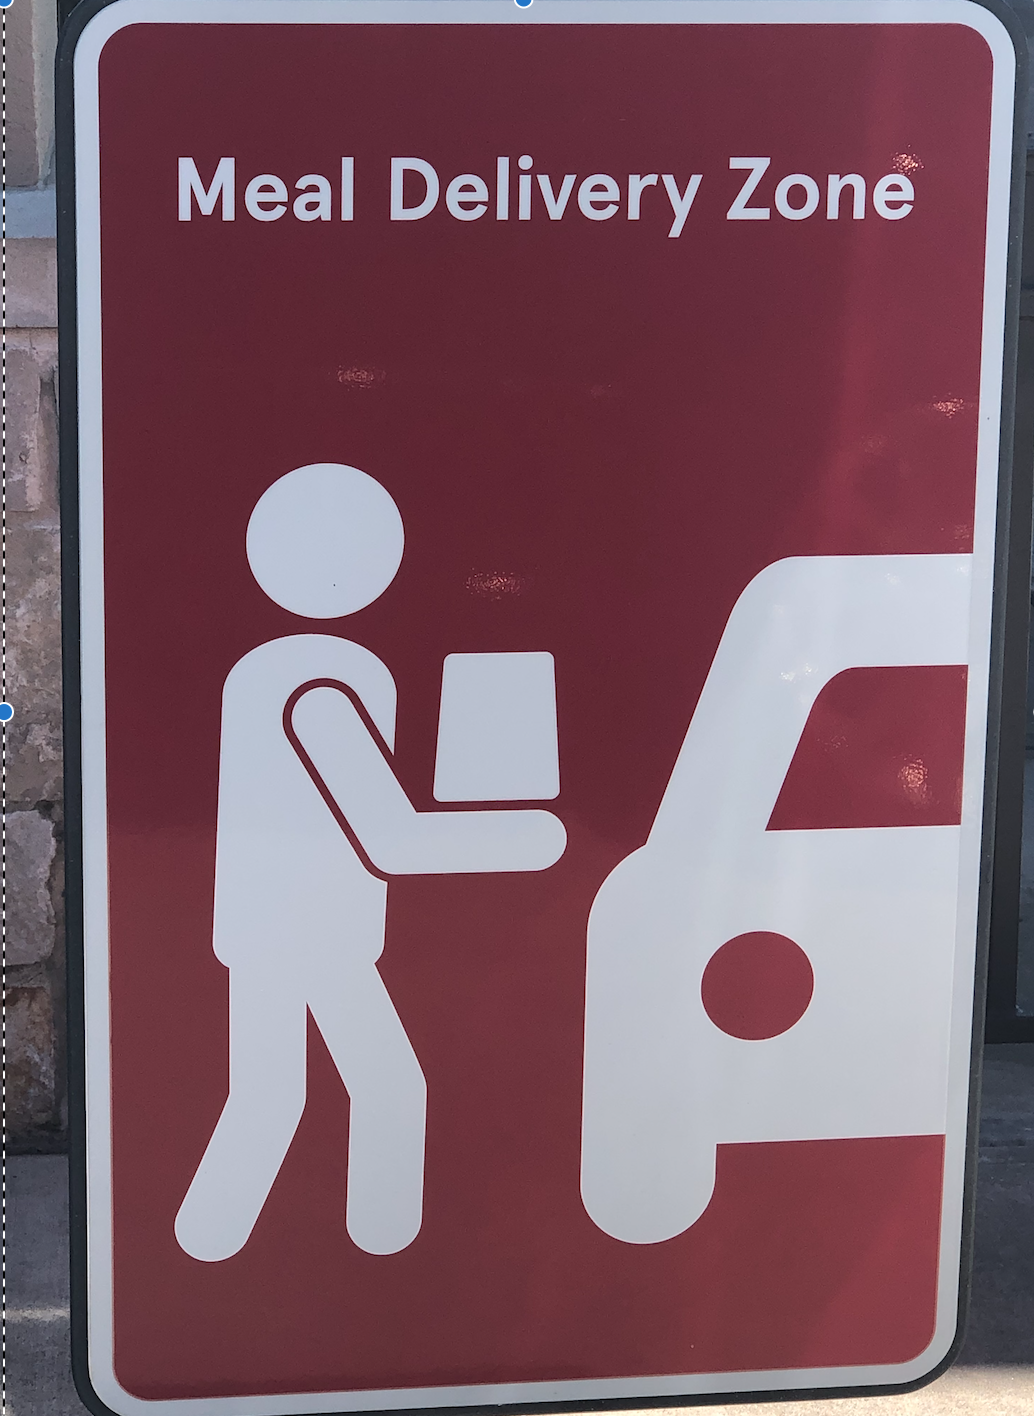 Supply Chain Scene, image of a Meal Delivery Zone sign 